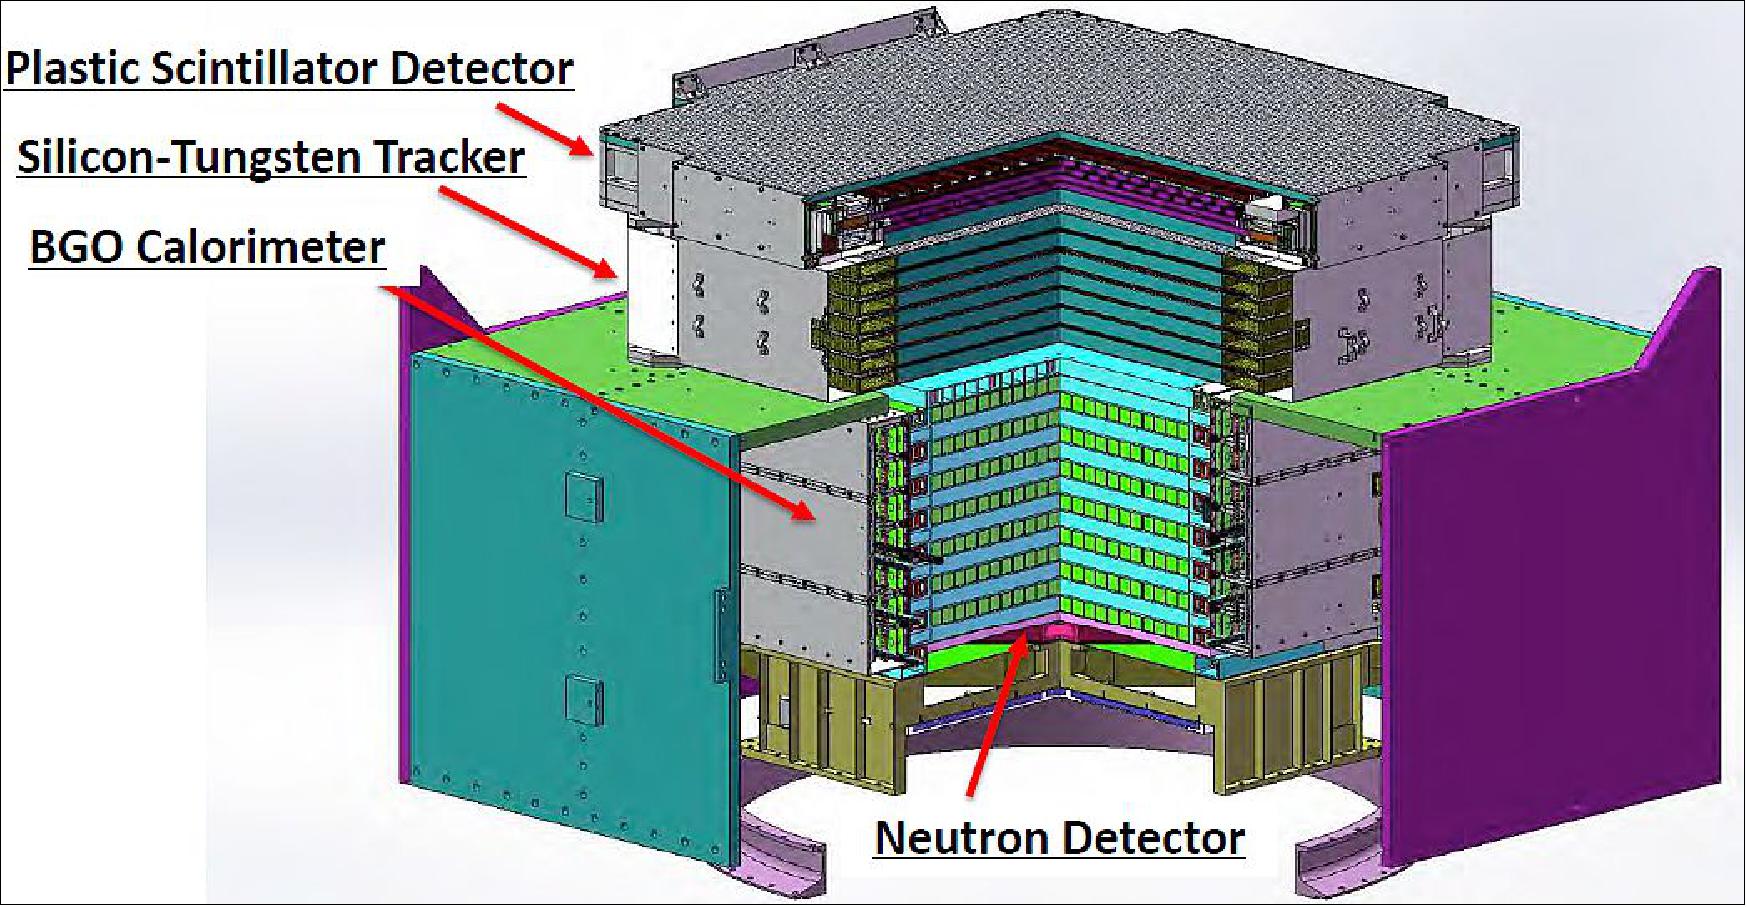 Figure 13: Overview of the DAMPE detector assembly (image credit: DAMPE collaboration)